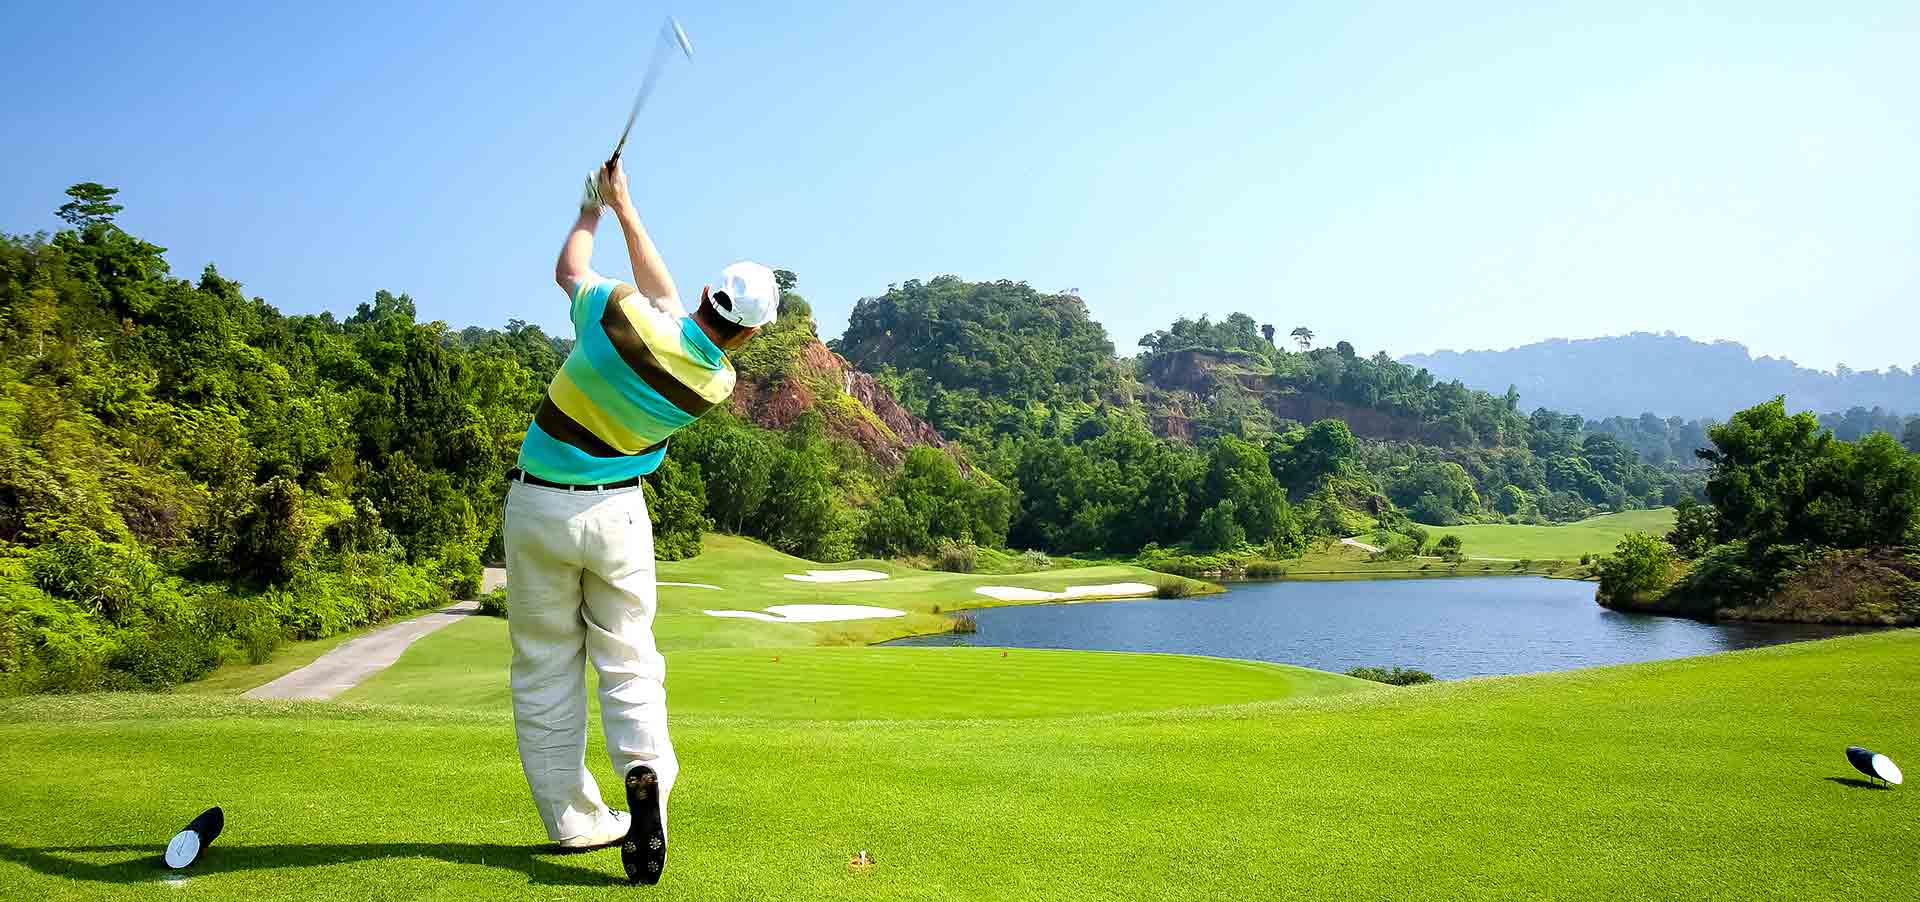 Article about All-Inclusive Golf Resorts - The Advantages